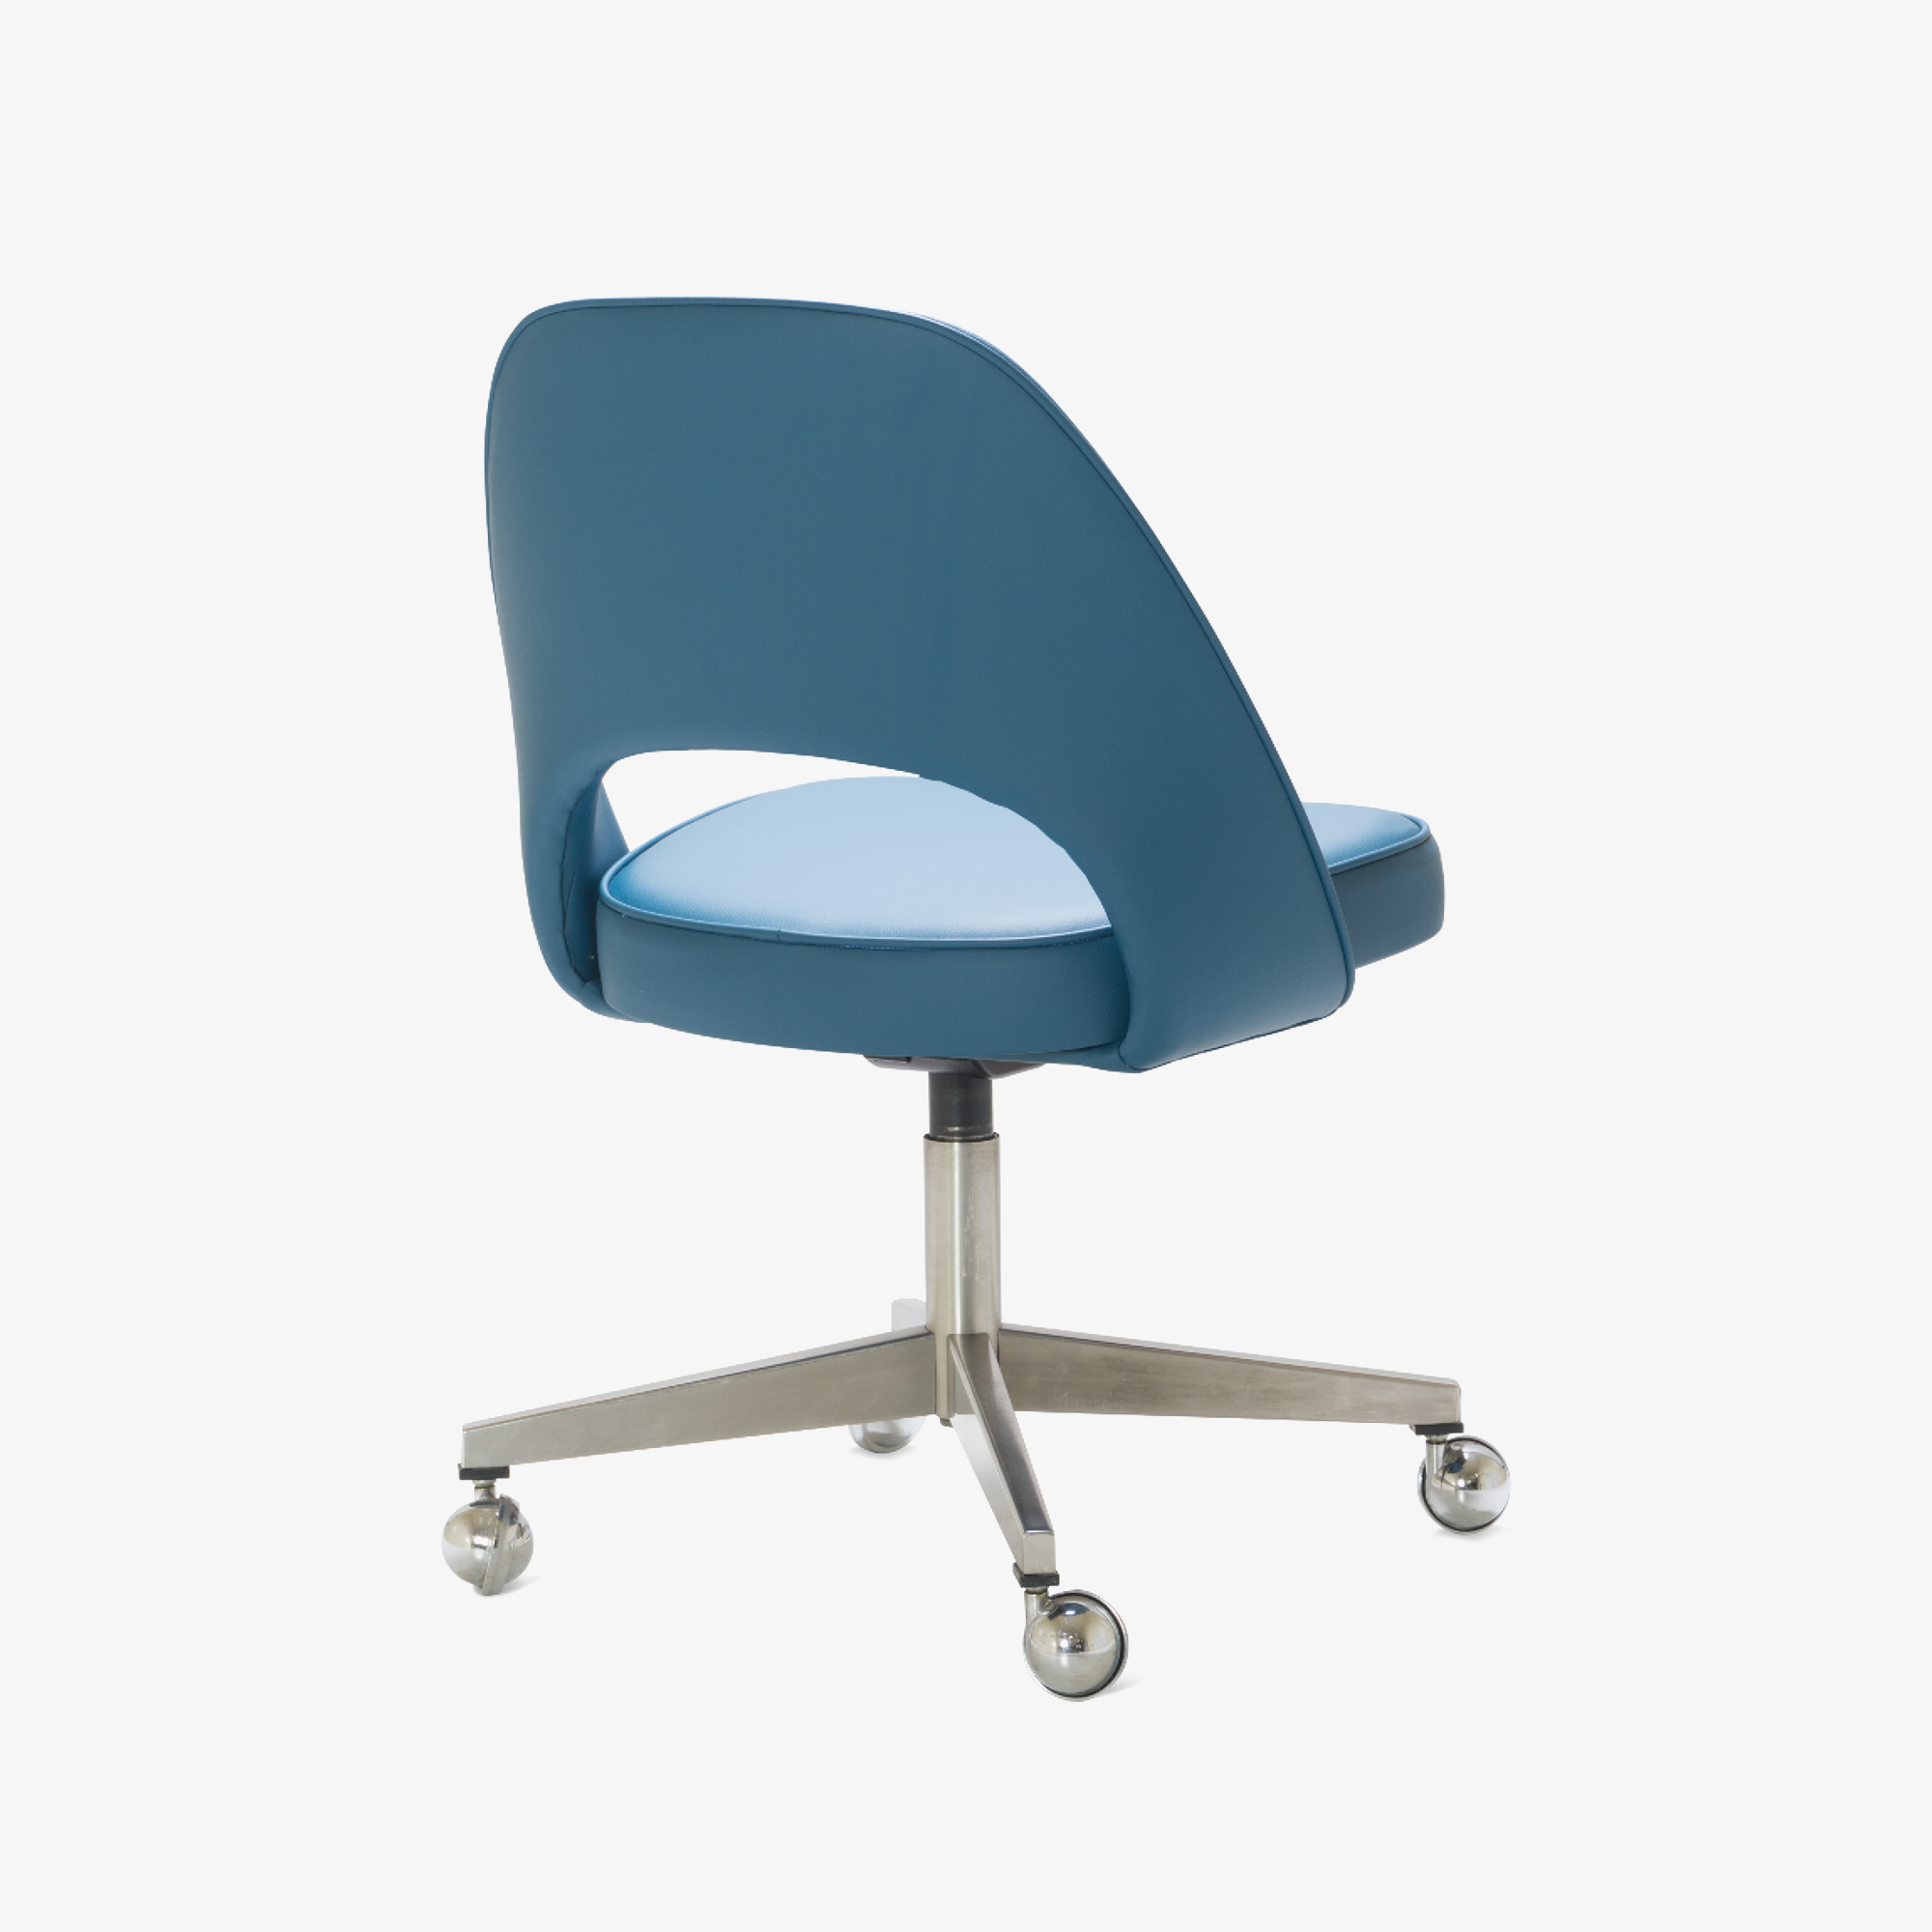 Saarinen Executive Armless Chair in Pelle Faux Leather, Swivel Base3.png